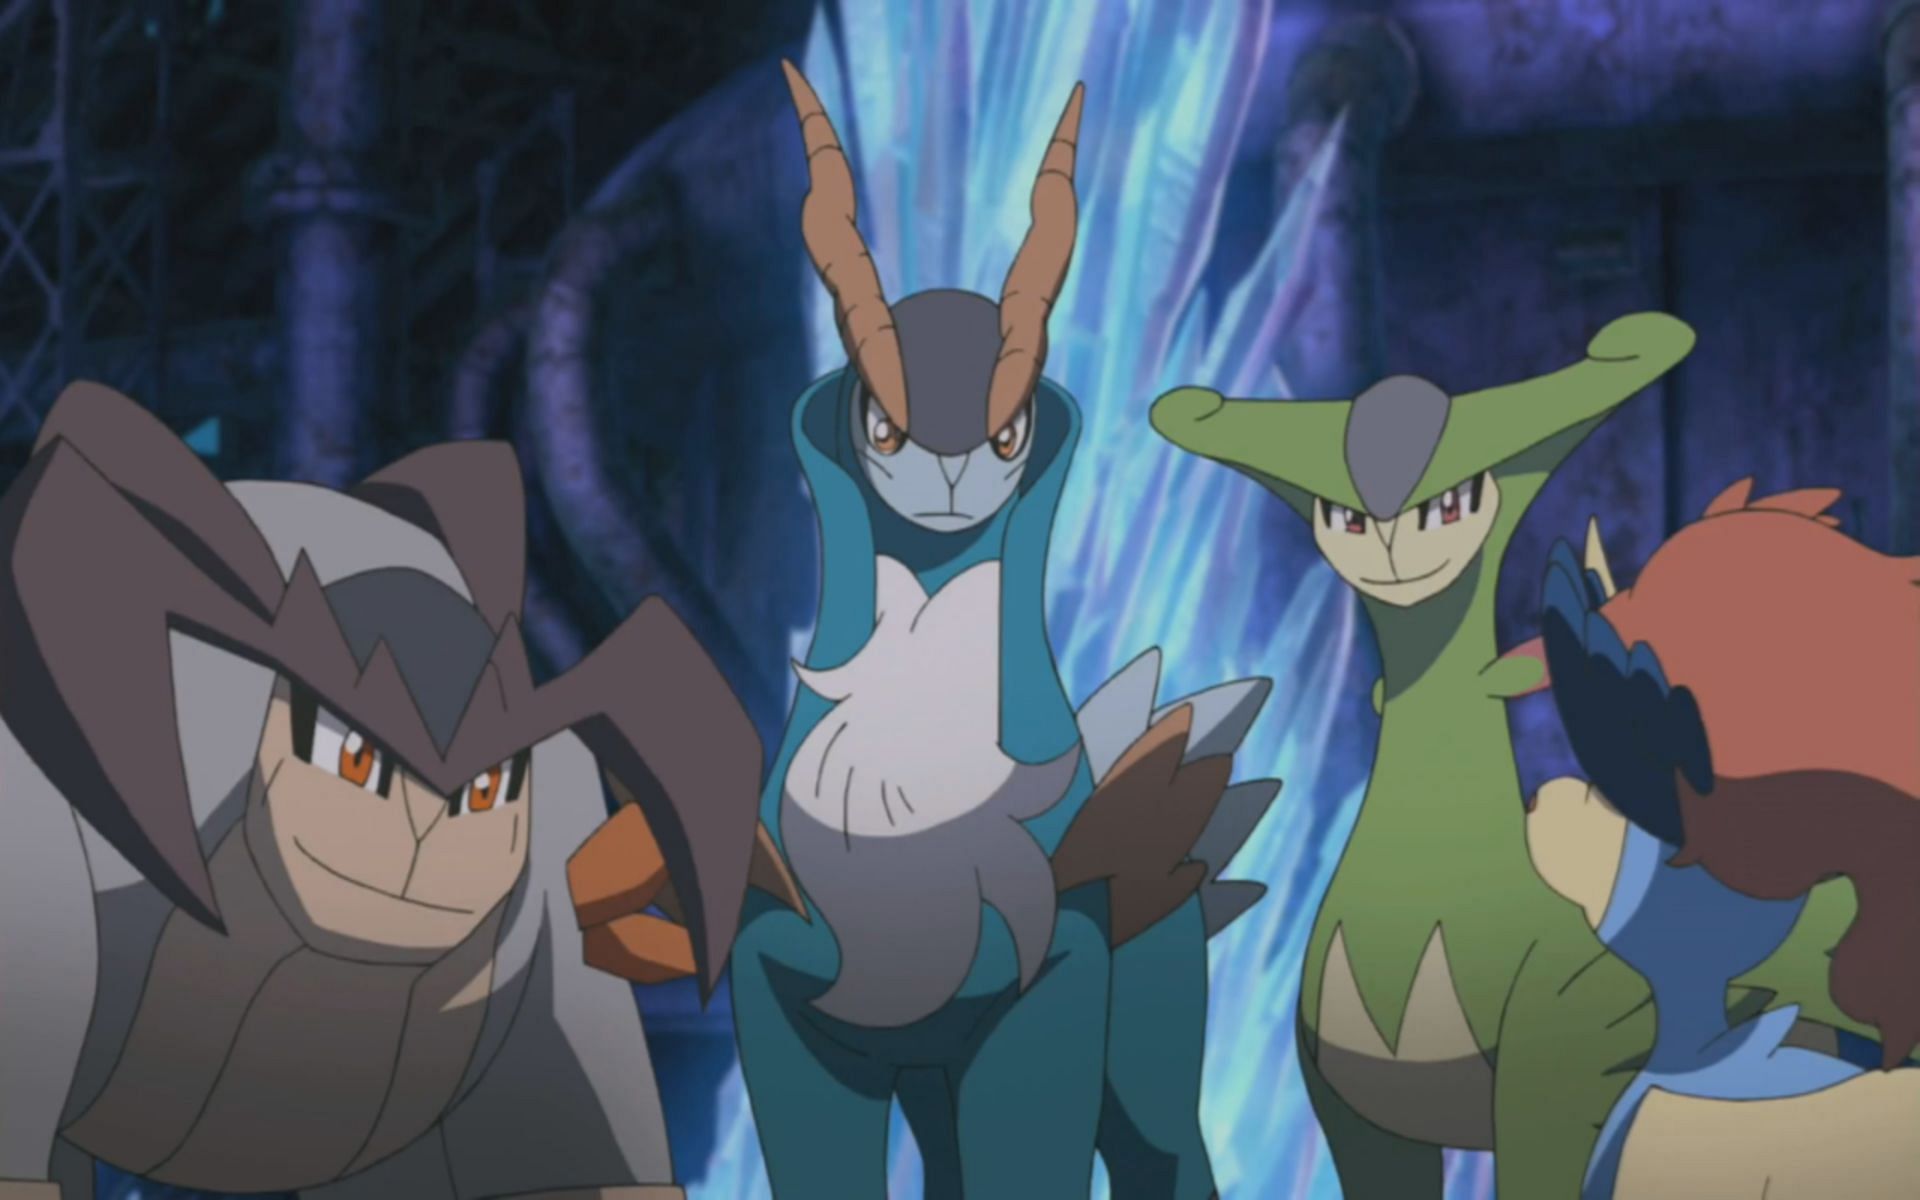 Each Sword of Justice is part Fighting-type (Image via The Pokemon Company)